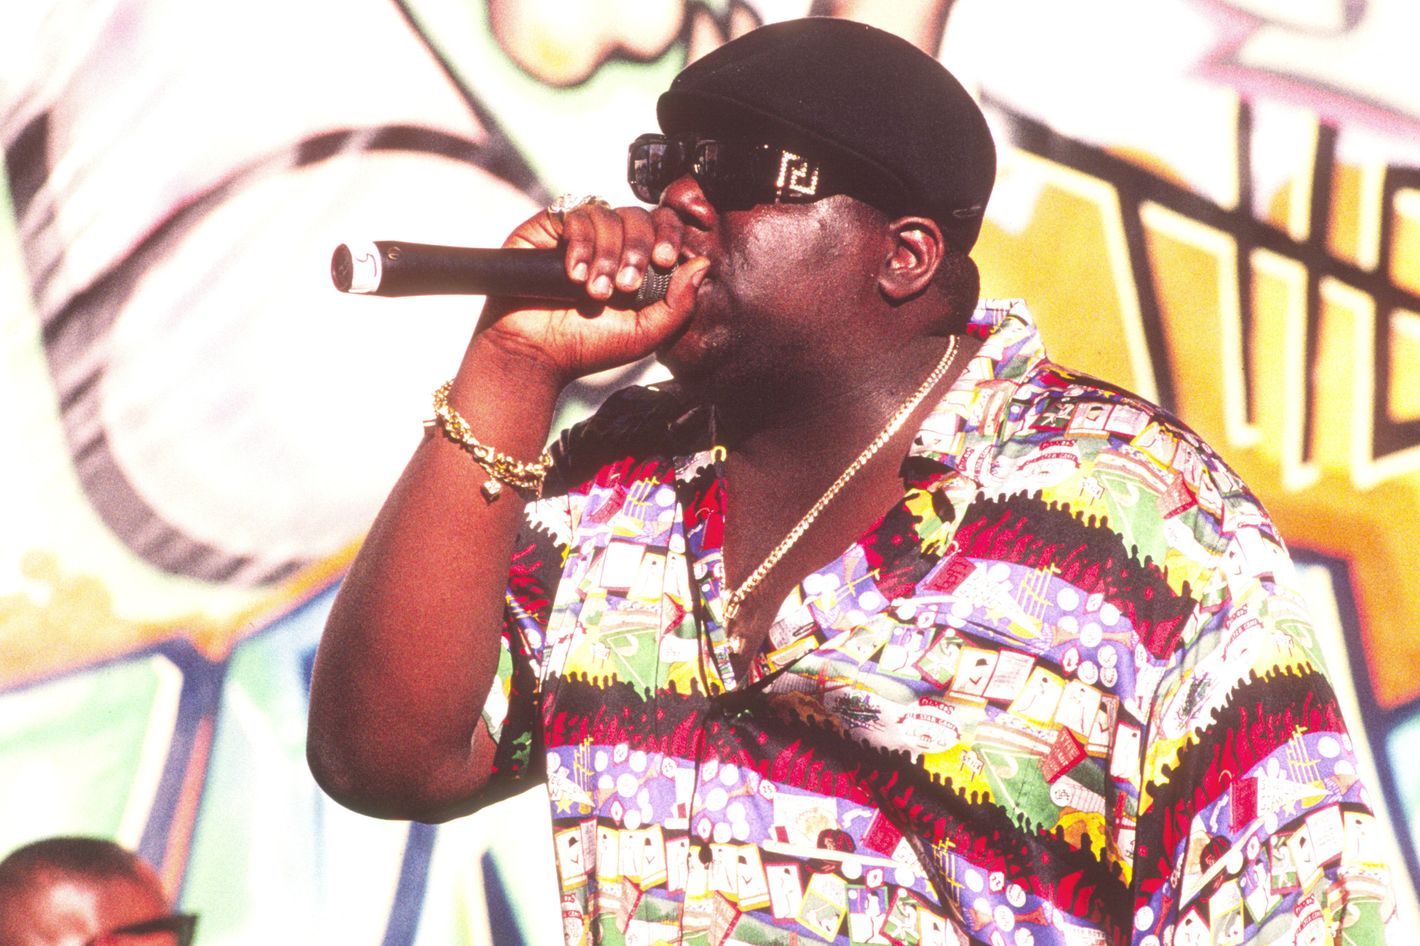 Brooklyn Nets pay tribute to Bed-Stuy, Notorious B.I.G. with new